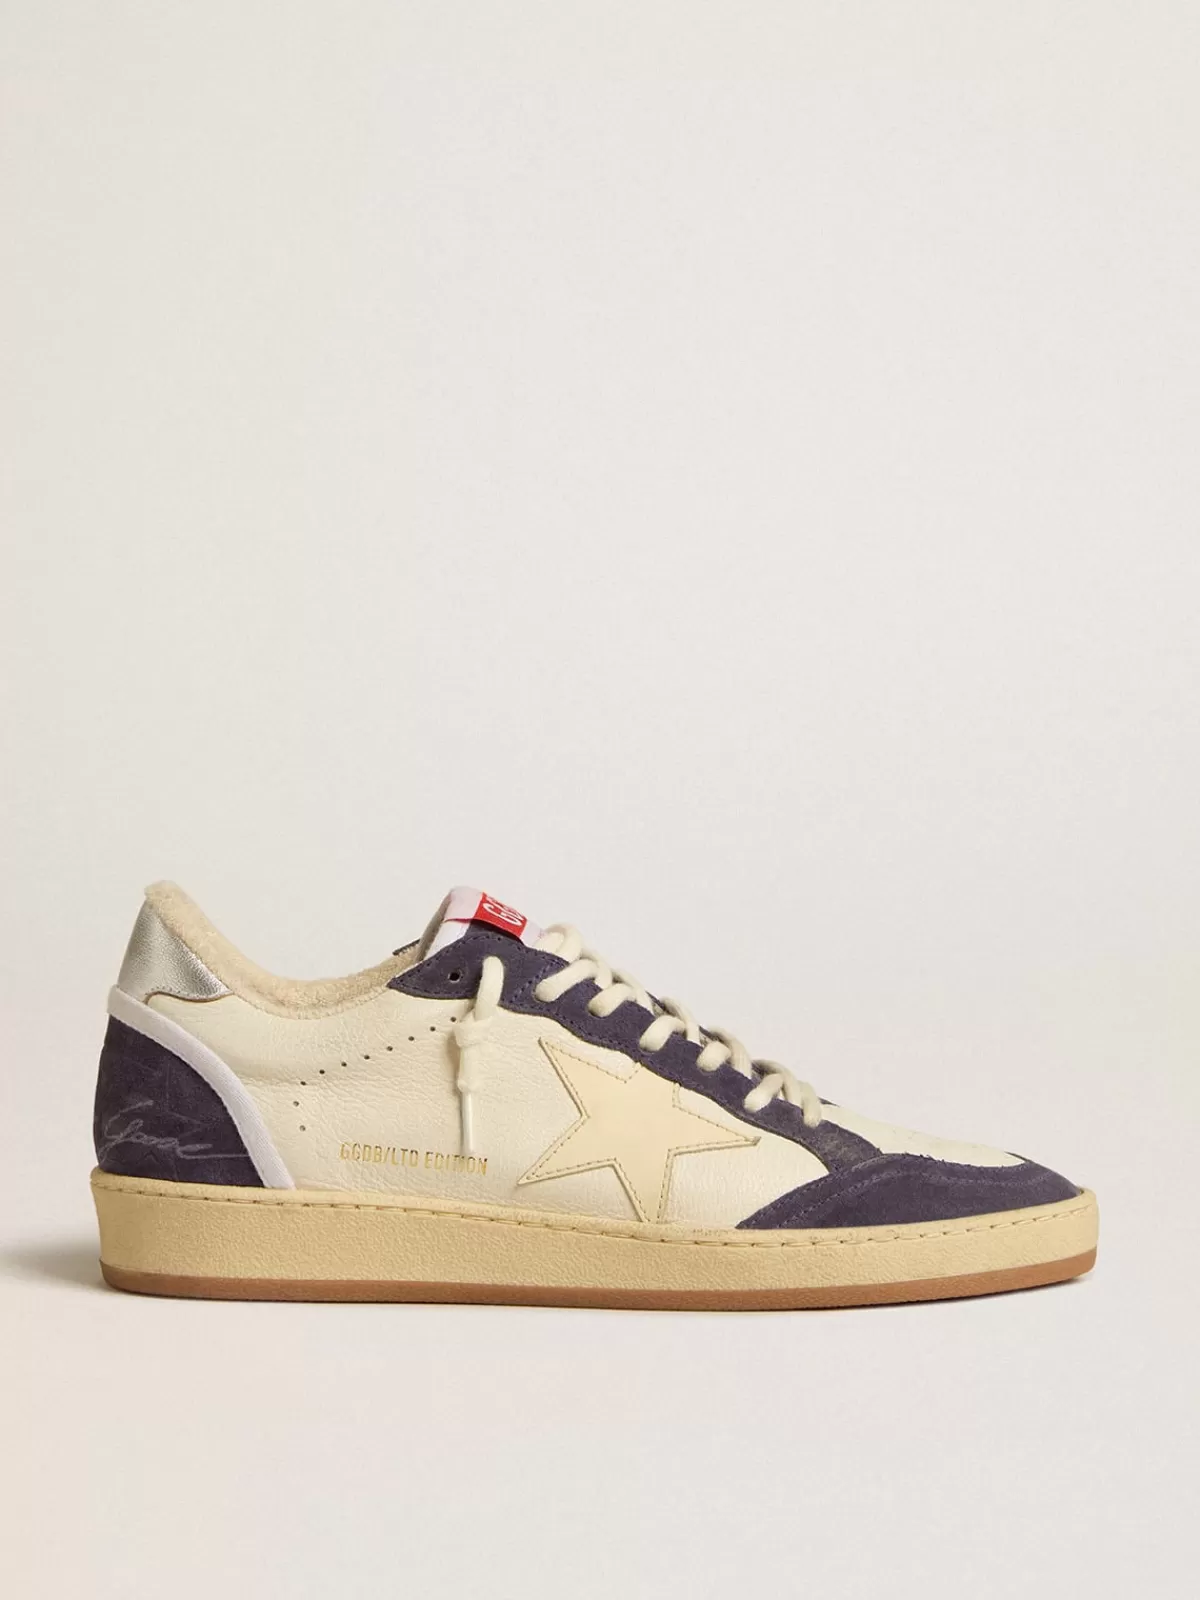 Golden Goose Ball Star LTD in nappa leather and suede with cream star and silver heel tab Store